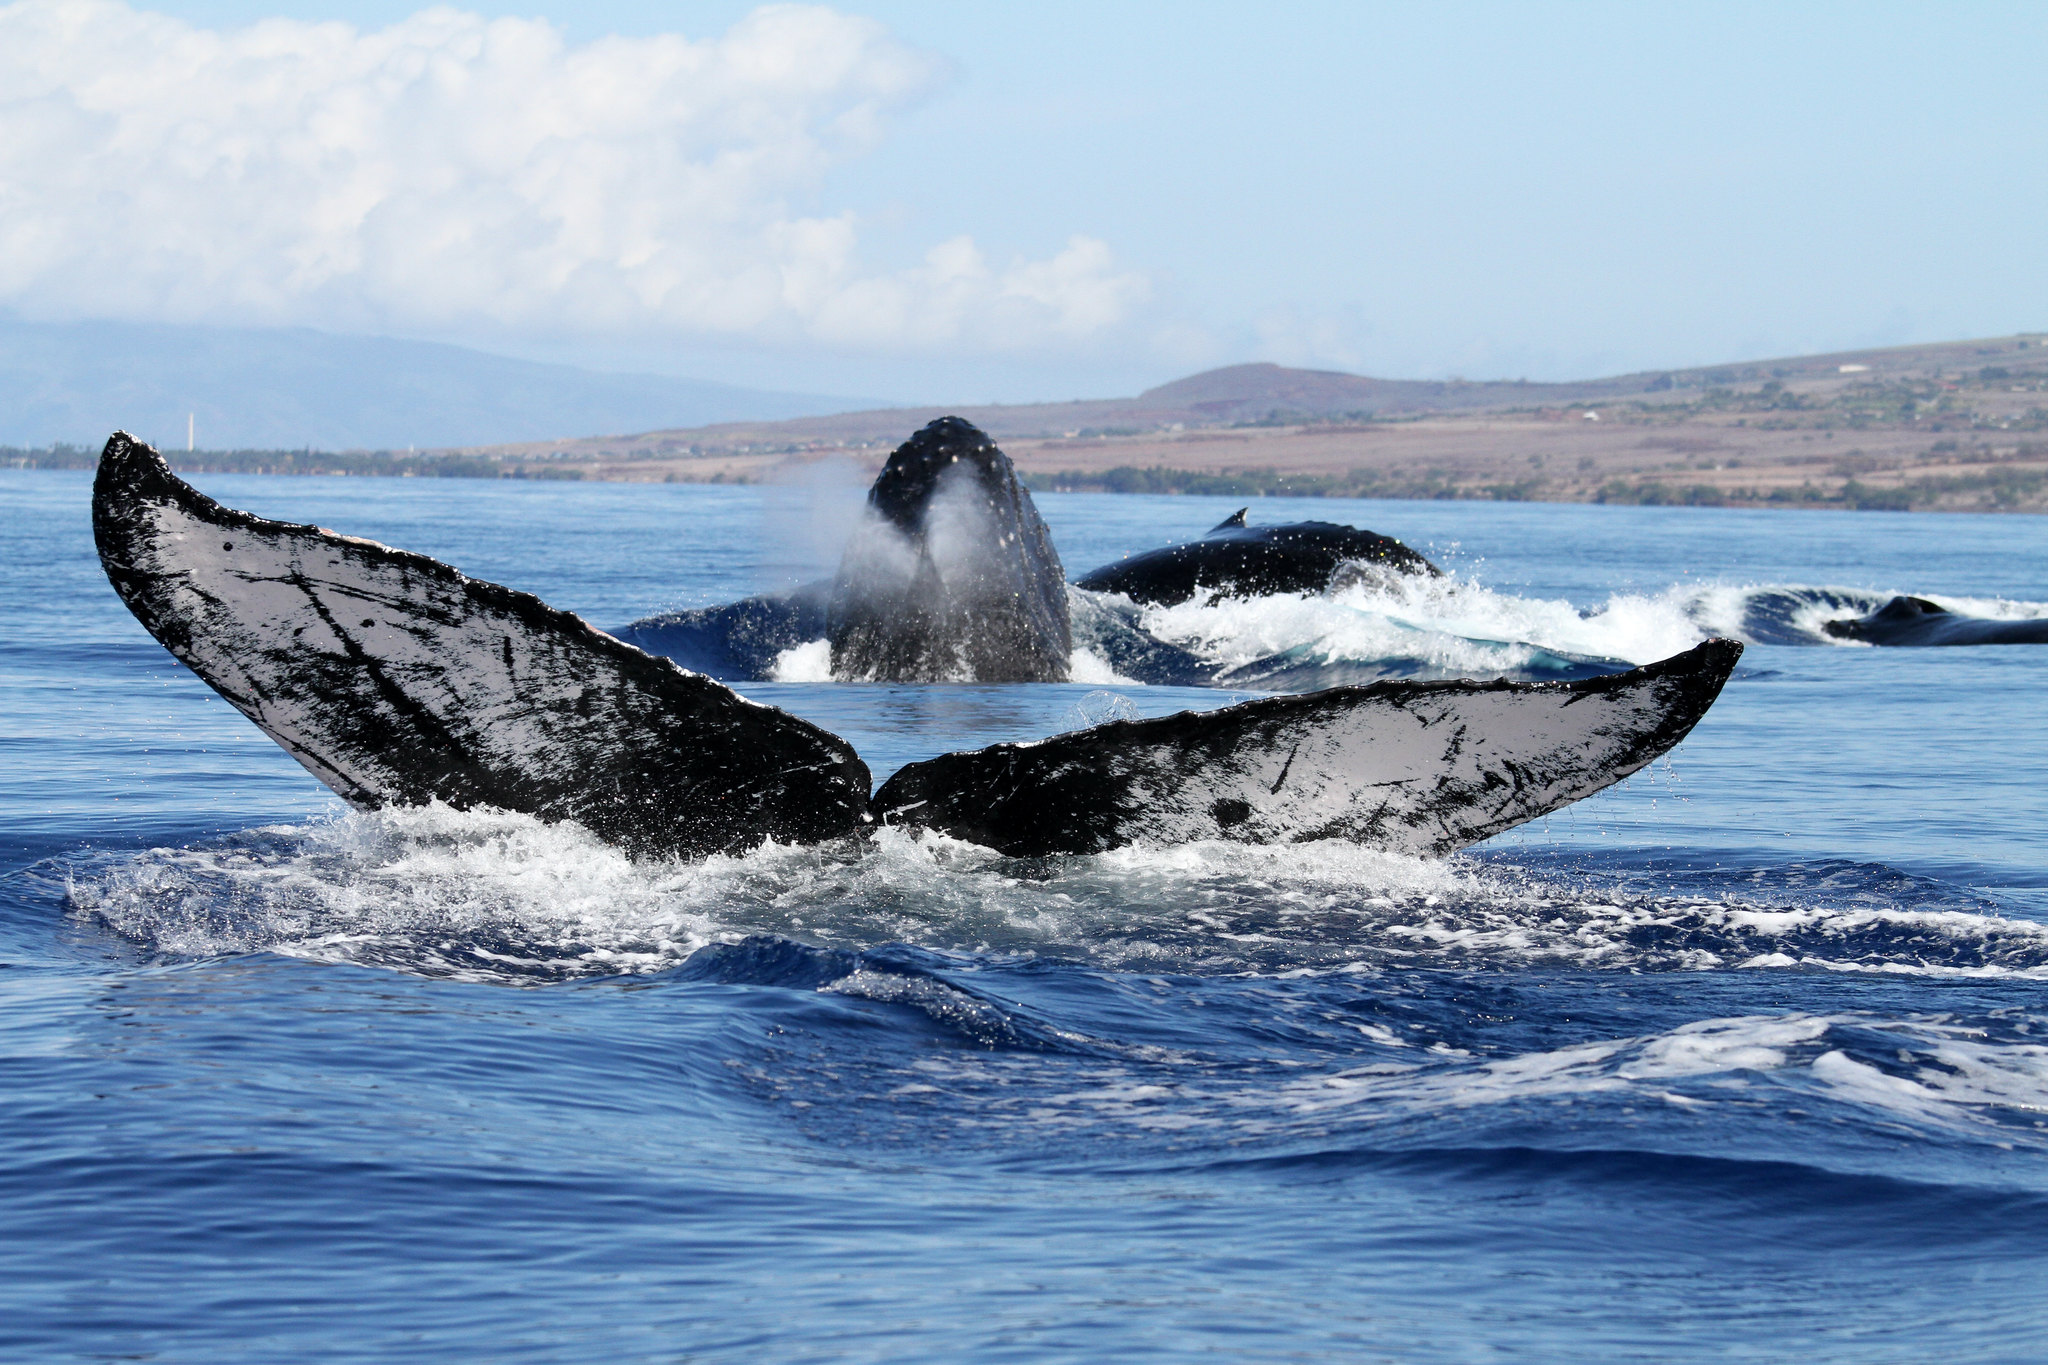 Two humpback whales spotted in Hawaiian Islands Humpback Whale National Marine Sanctuary.